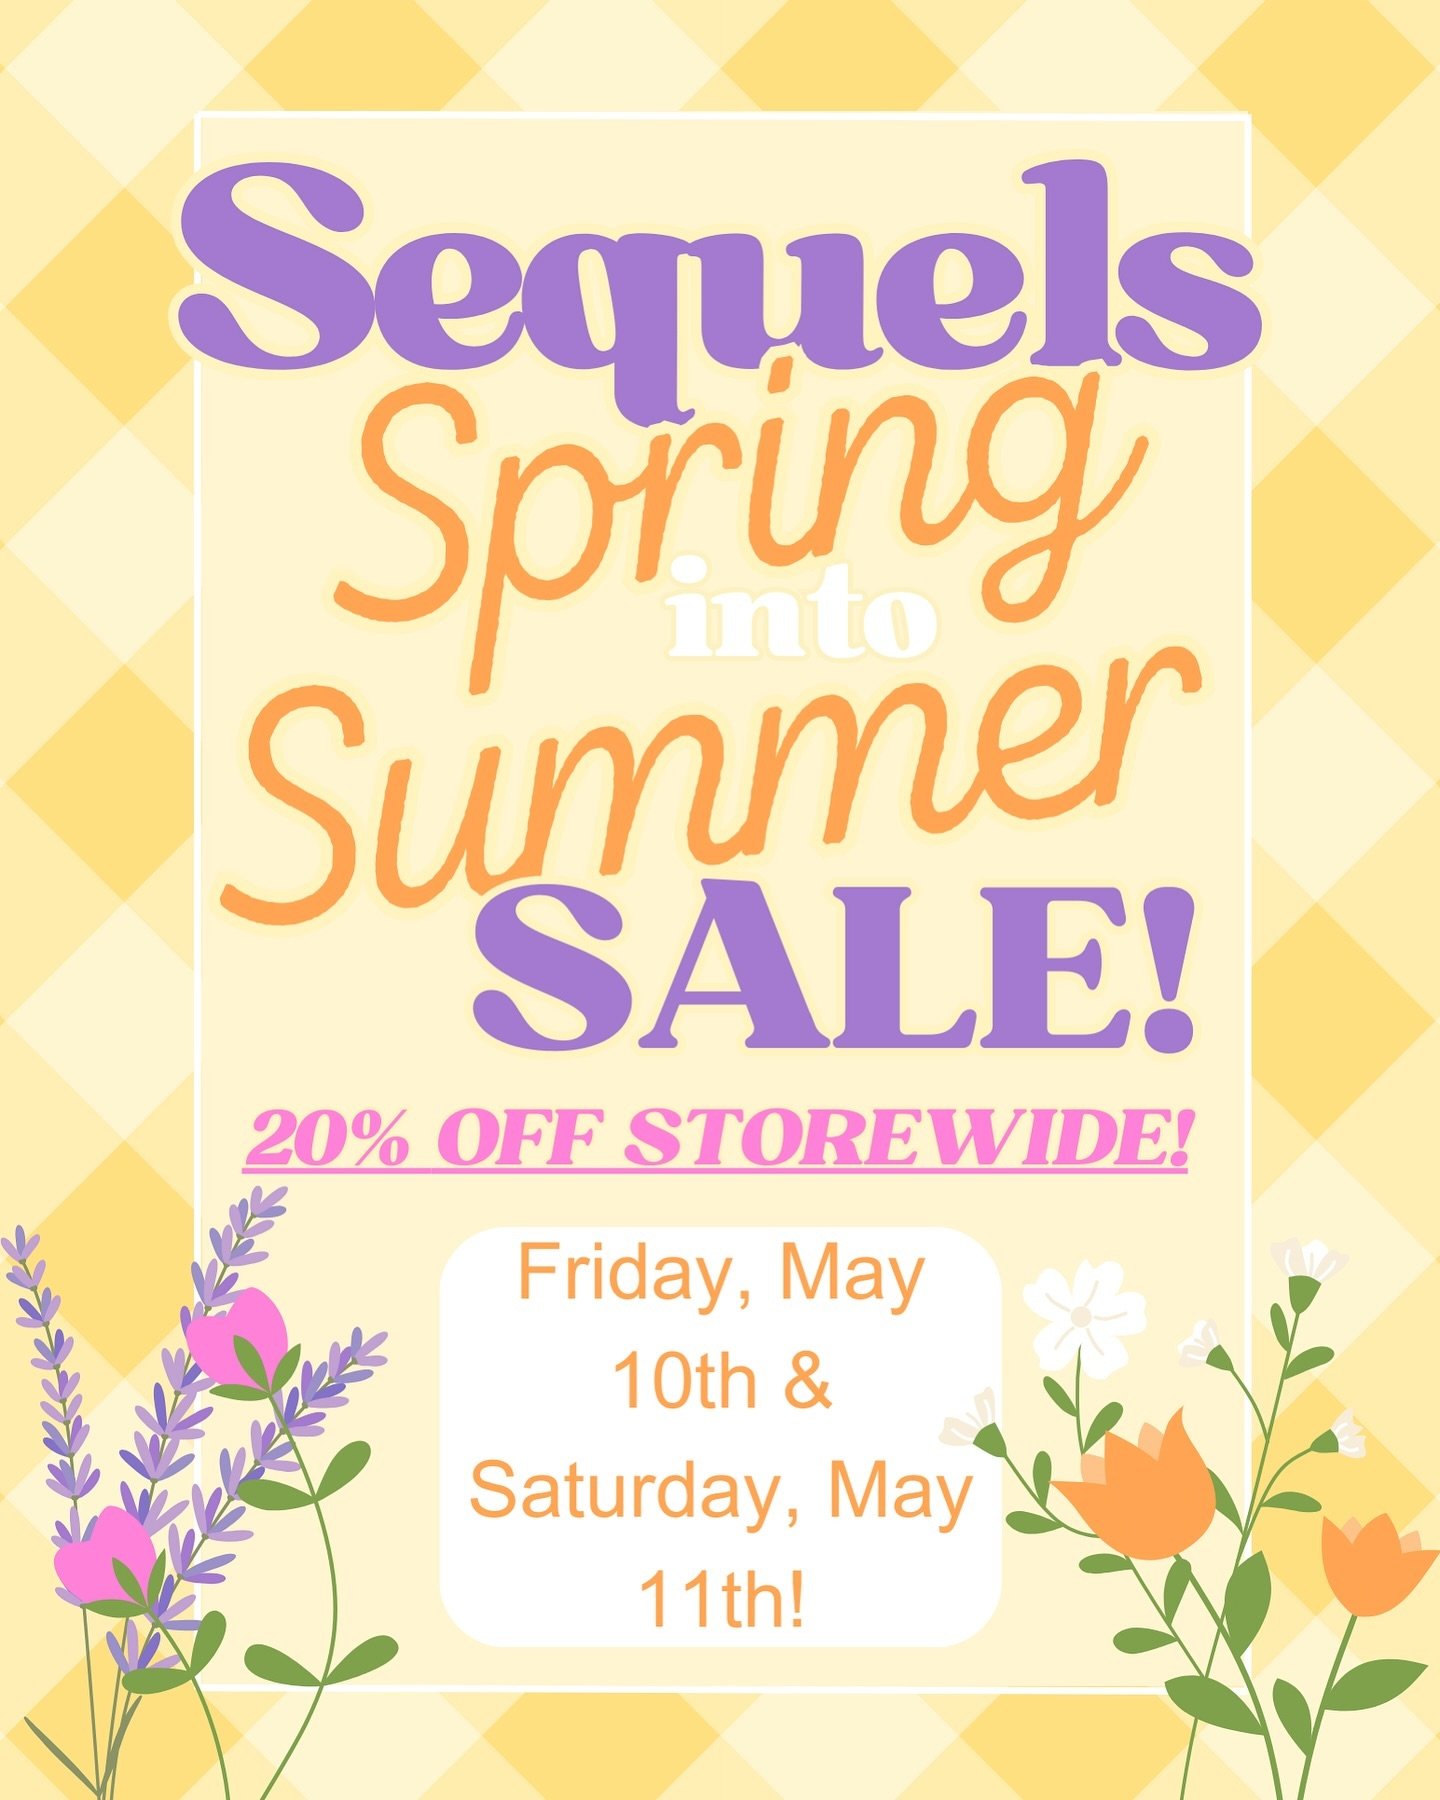 Sequels Spring into Summer Sale is coming soon!🌷☀️

 Get 20% OFF STOREWIDE on Friday, May 10th and Saturday, May 11th!😱
This includes our brand NEW Sequels Exclusive Accessories and ALL Spring/Summer inverntory!🙌🛍️ 
Be sure to mark your calendars